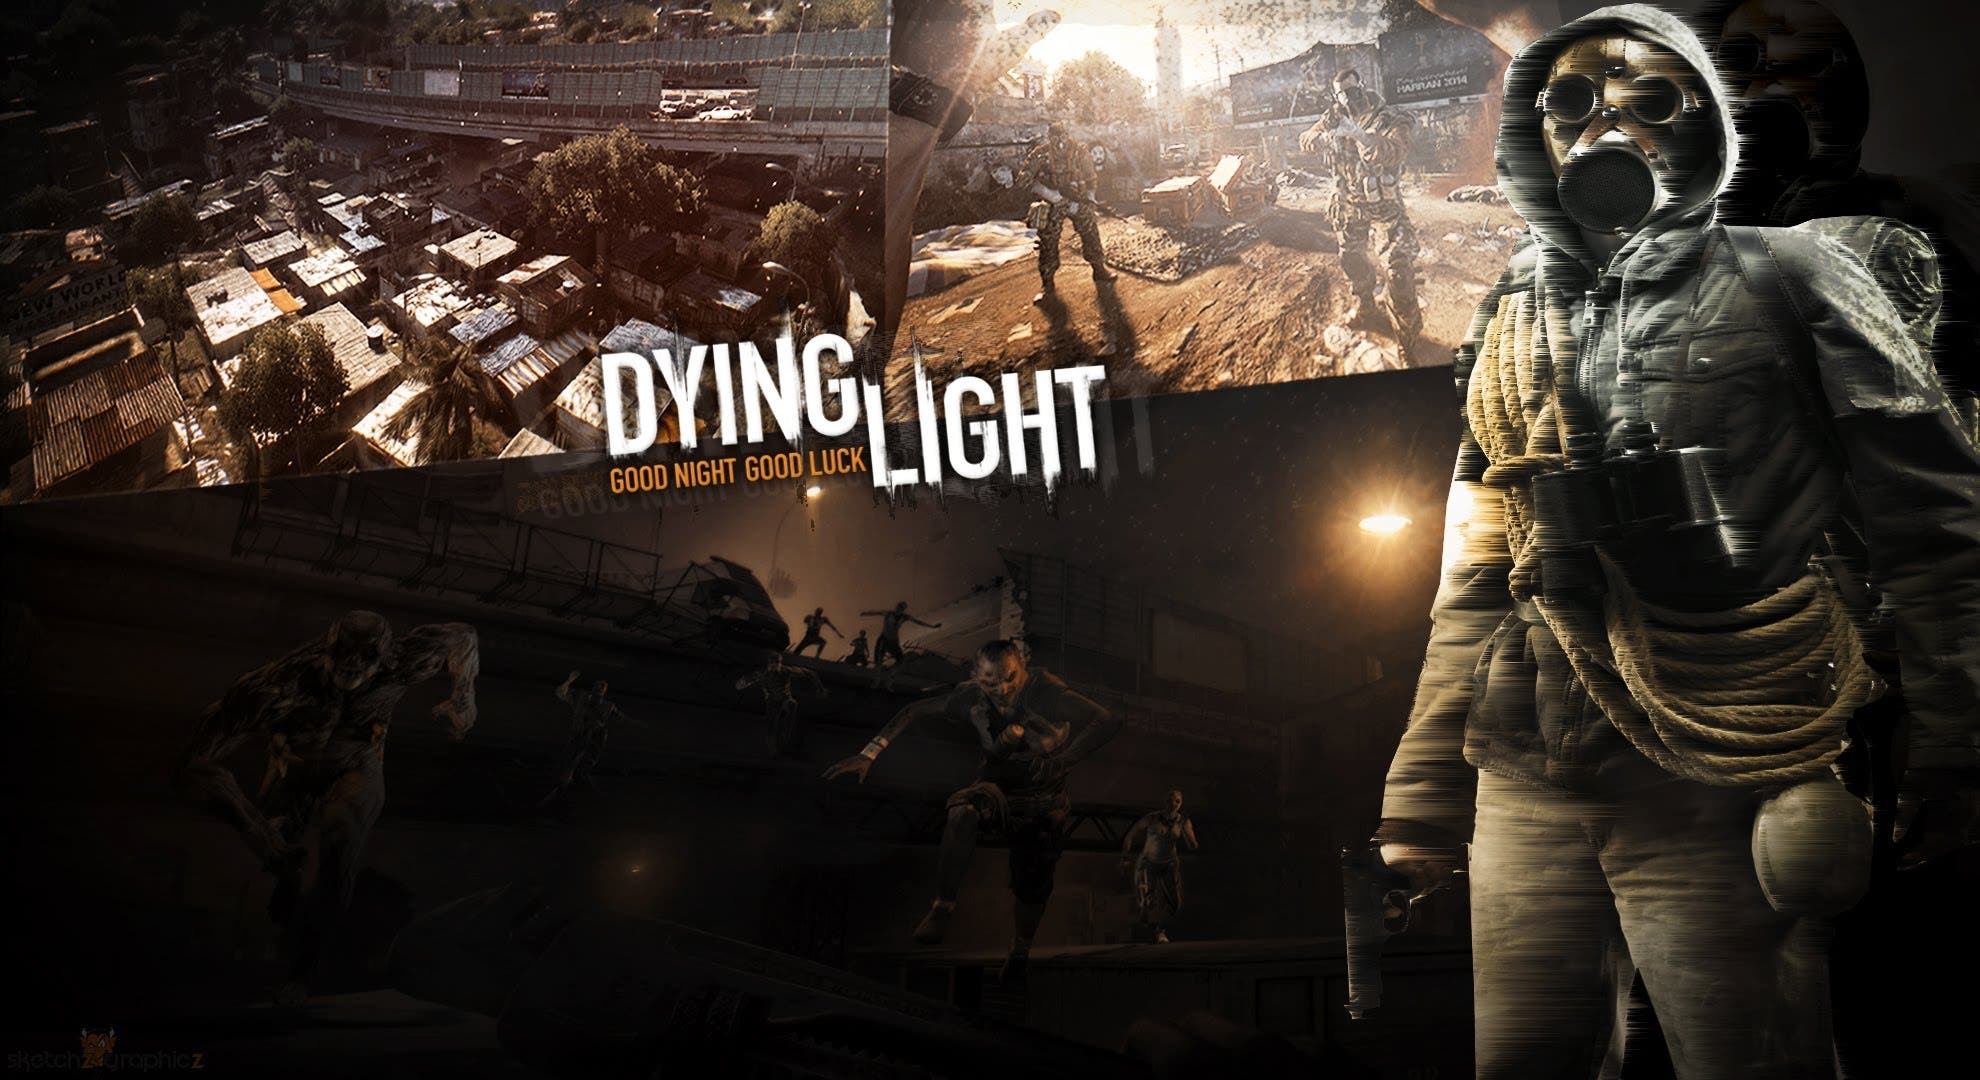 dying light 2 game pass